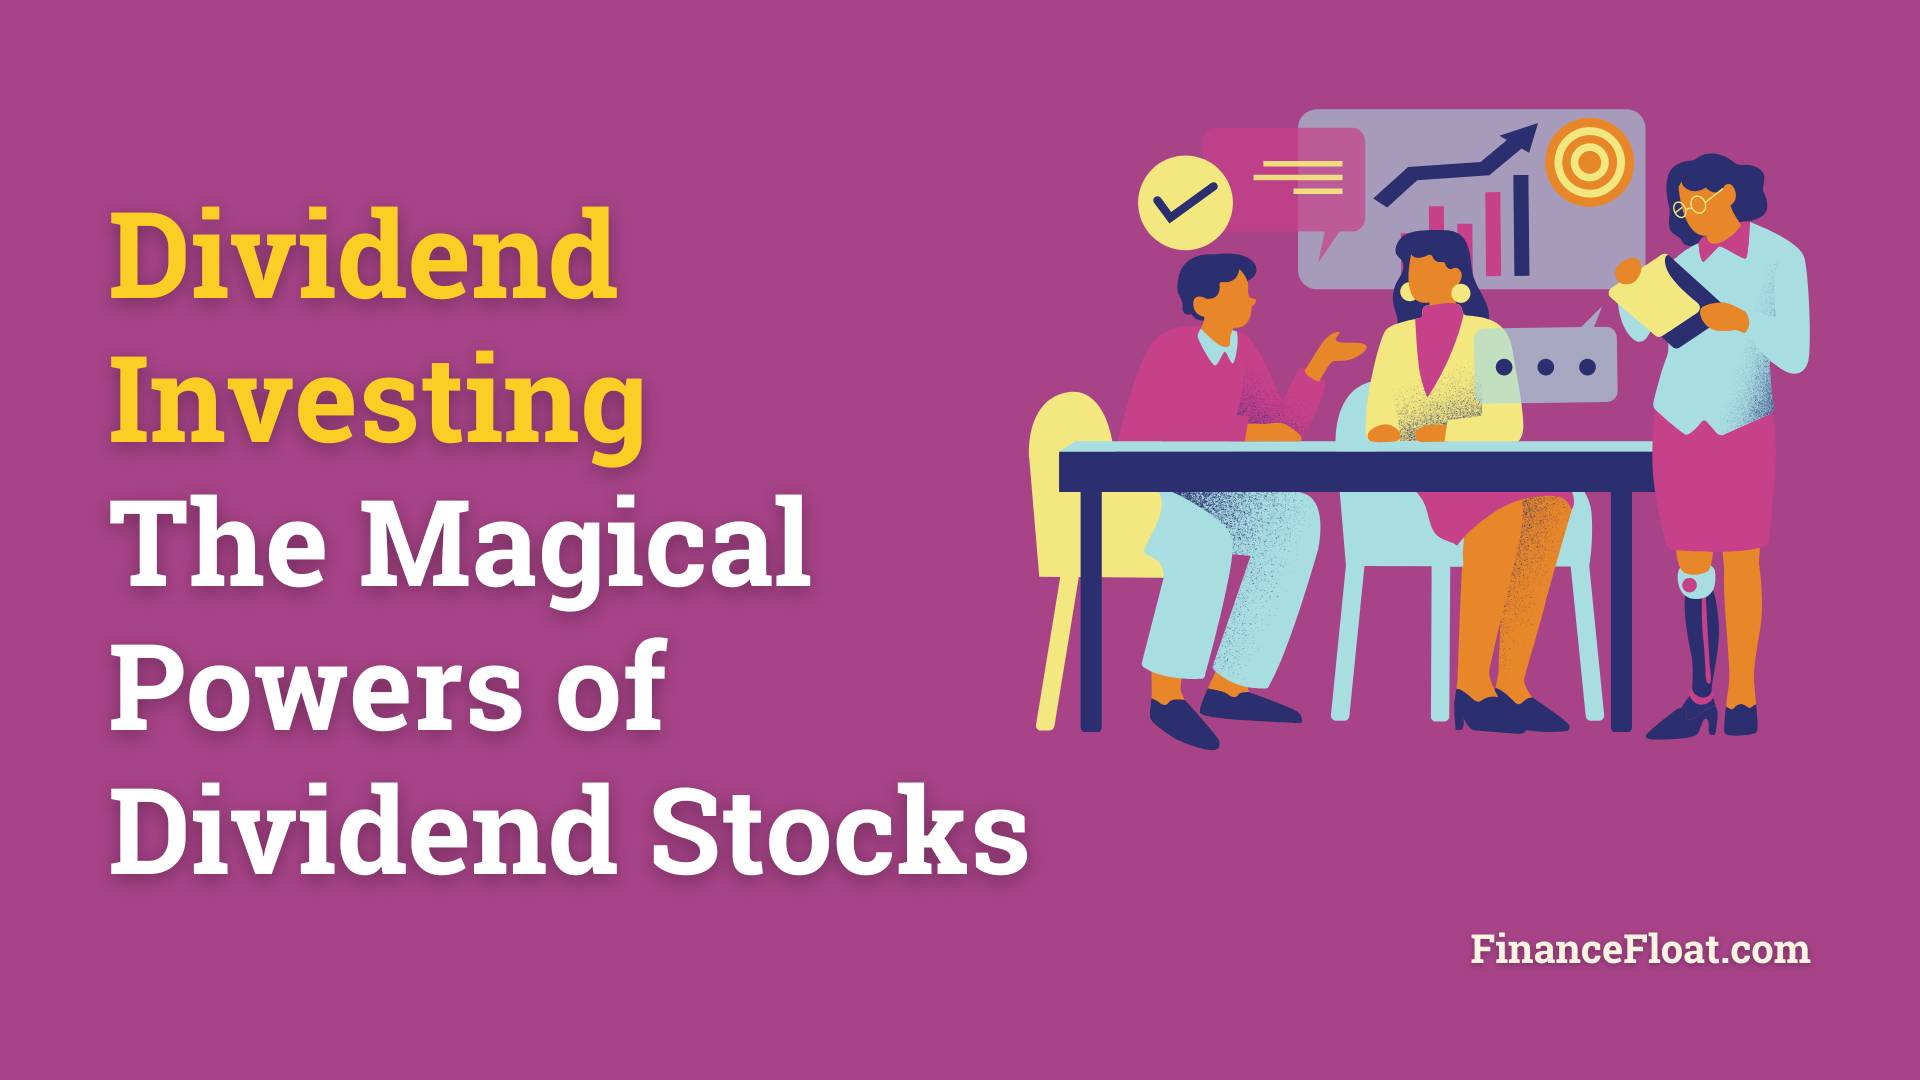 Dividend Investing The Magical Powers of Dividend Stocks